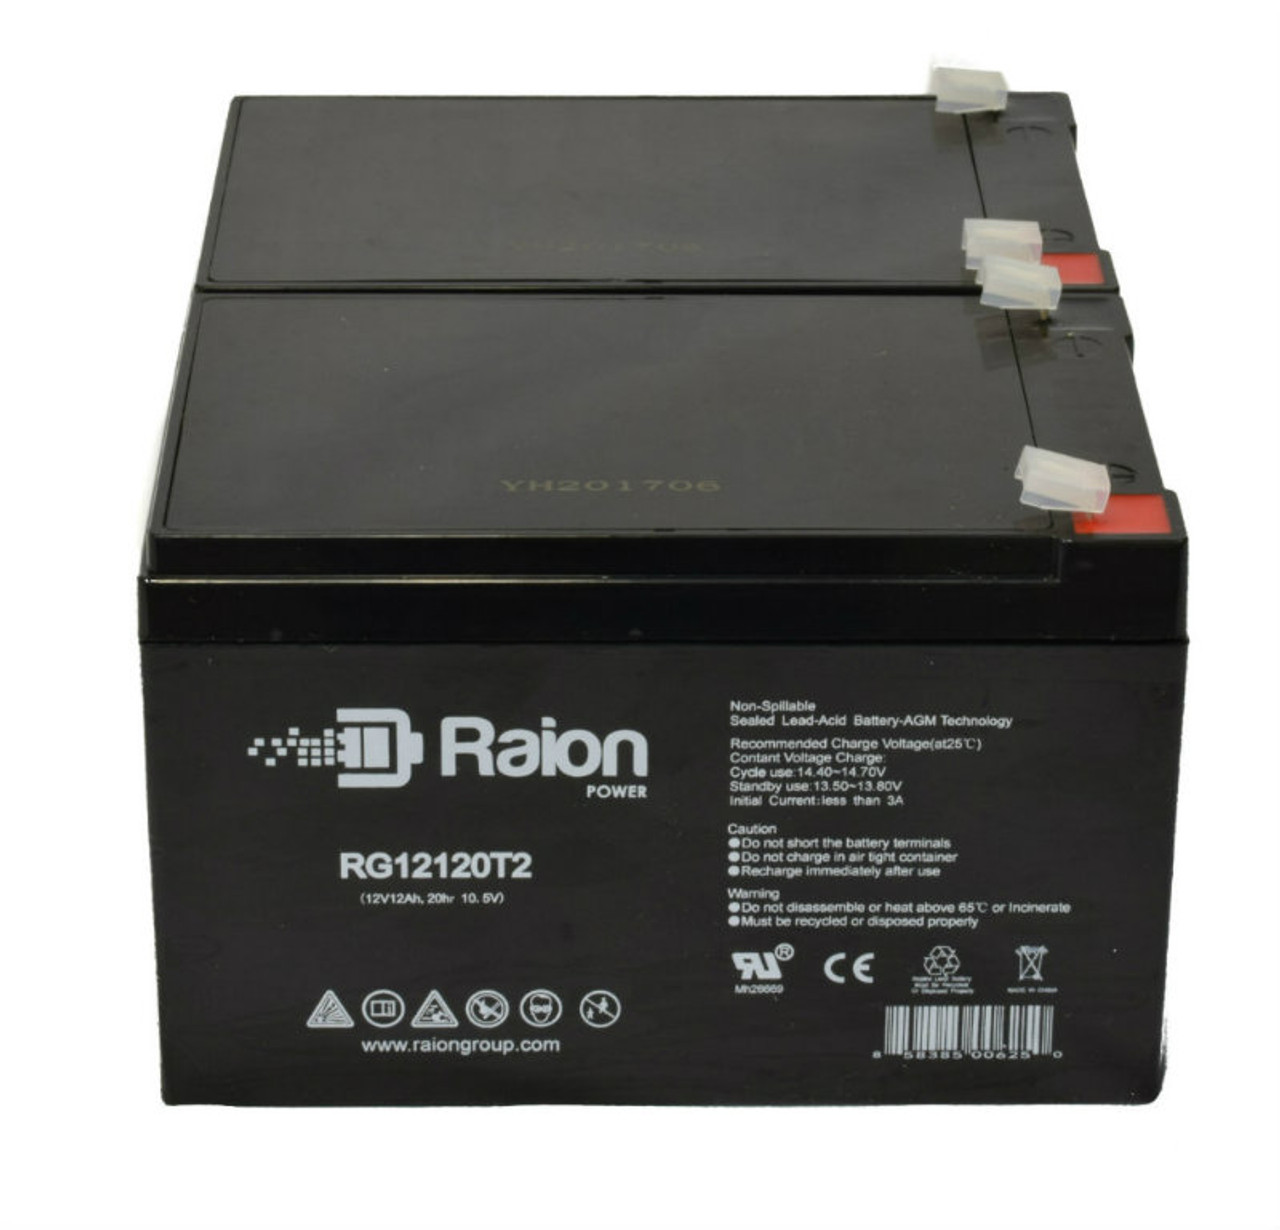 Raion Power 12V 12Ah Non-Spillable Compatible Replacement Battery for Fuli FL12120HR - (2 Pack)